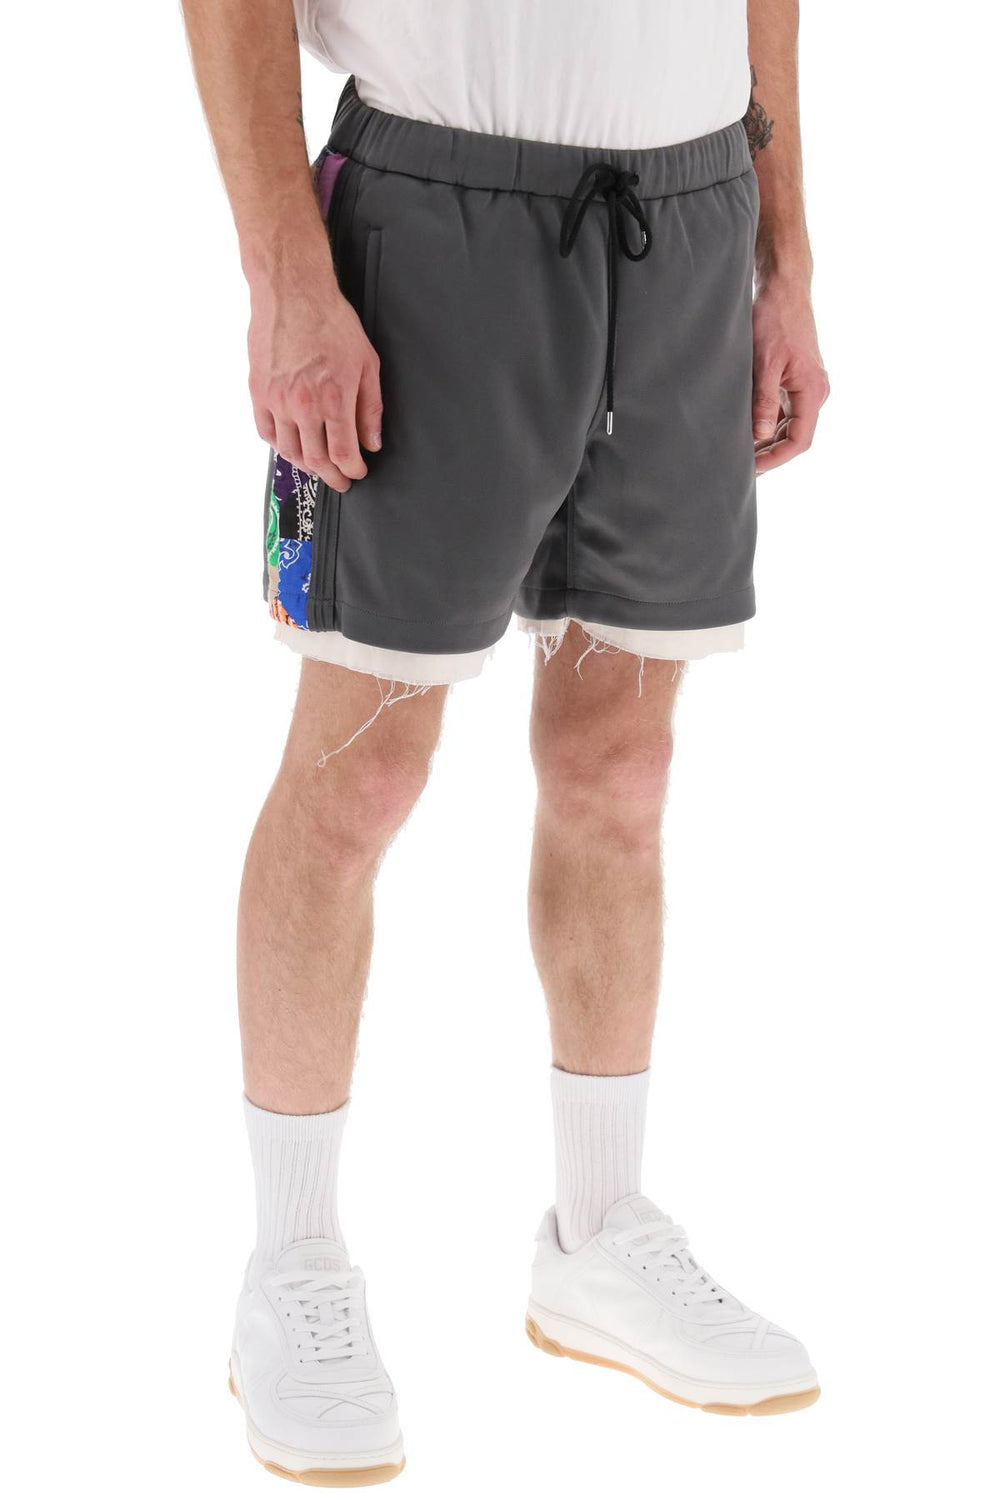 Children of the discordance jersey shorts with bandana bands-1